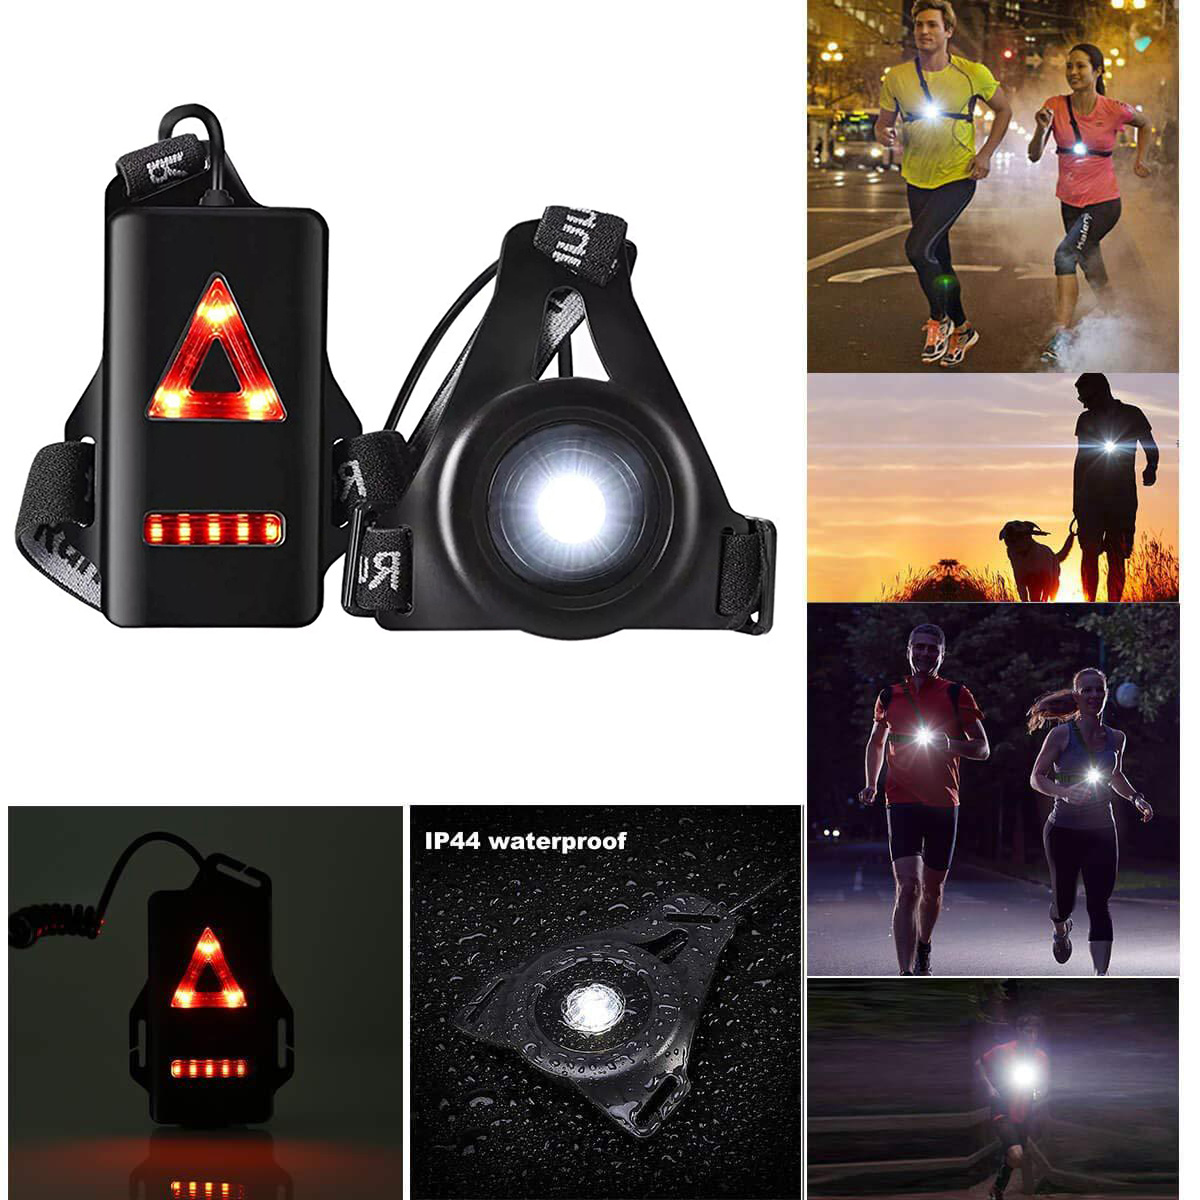  RFSHOP Chest Light, Running Lights for Runners, Chest Light for  Running at Night, Back Warning Light, Ultra Bright Adjustable USB  Rechargeable Waterproof LED Running Lights for Camping Hiking Running :  Sports